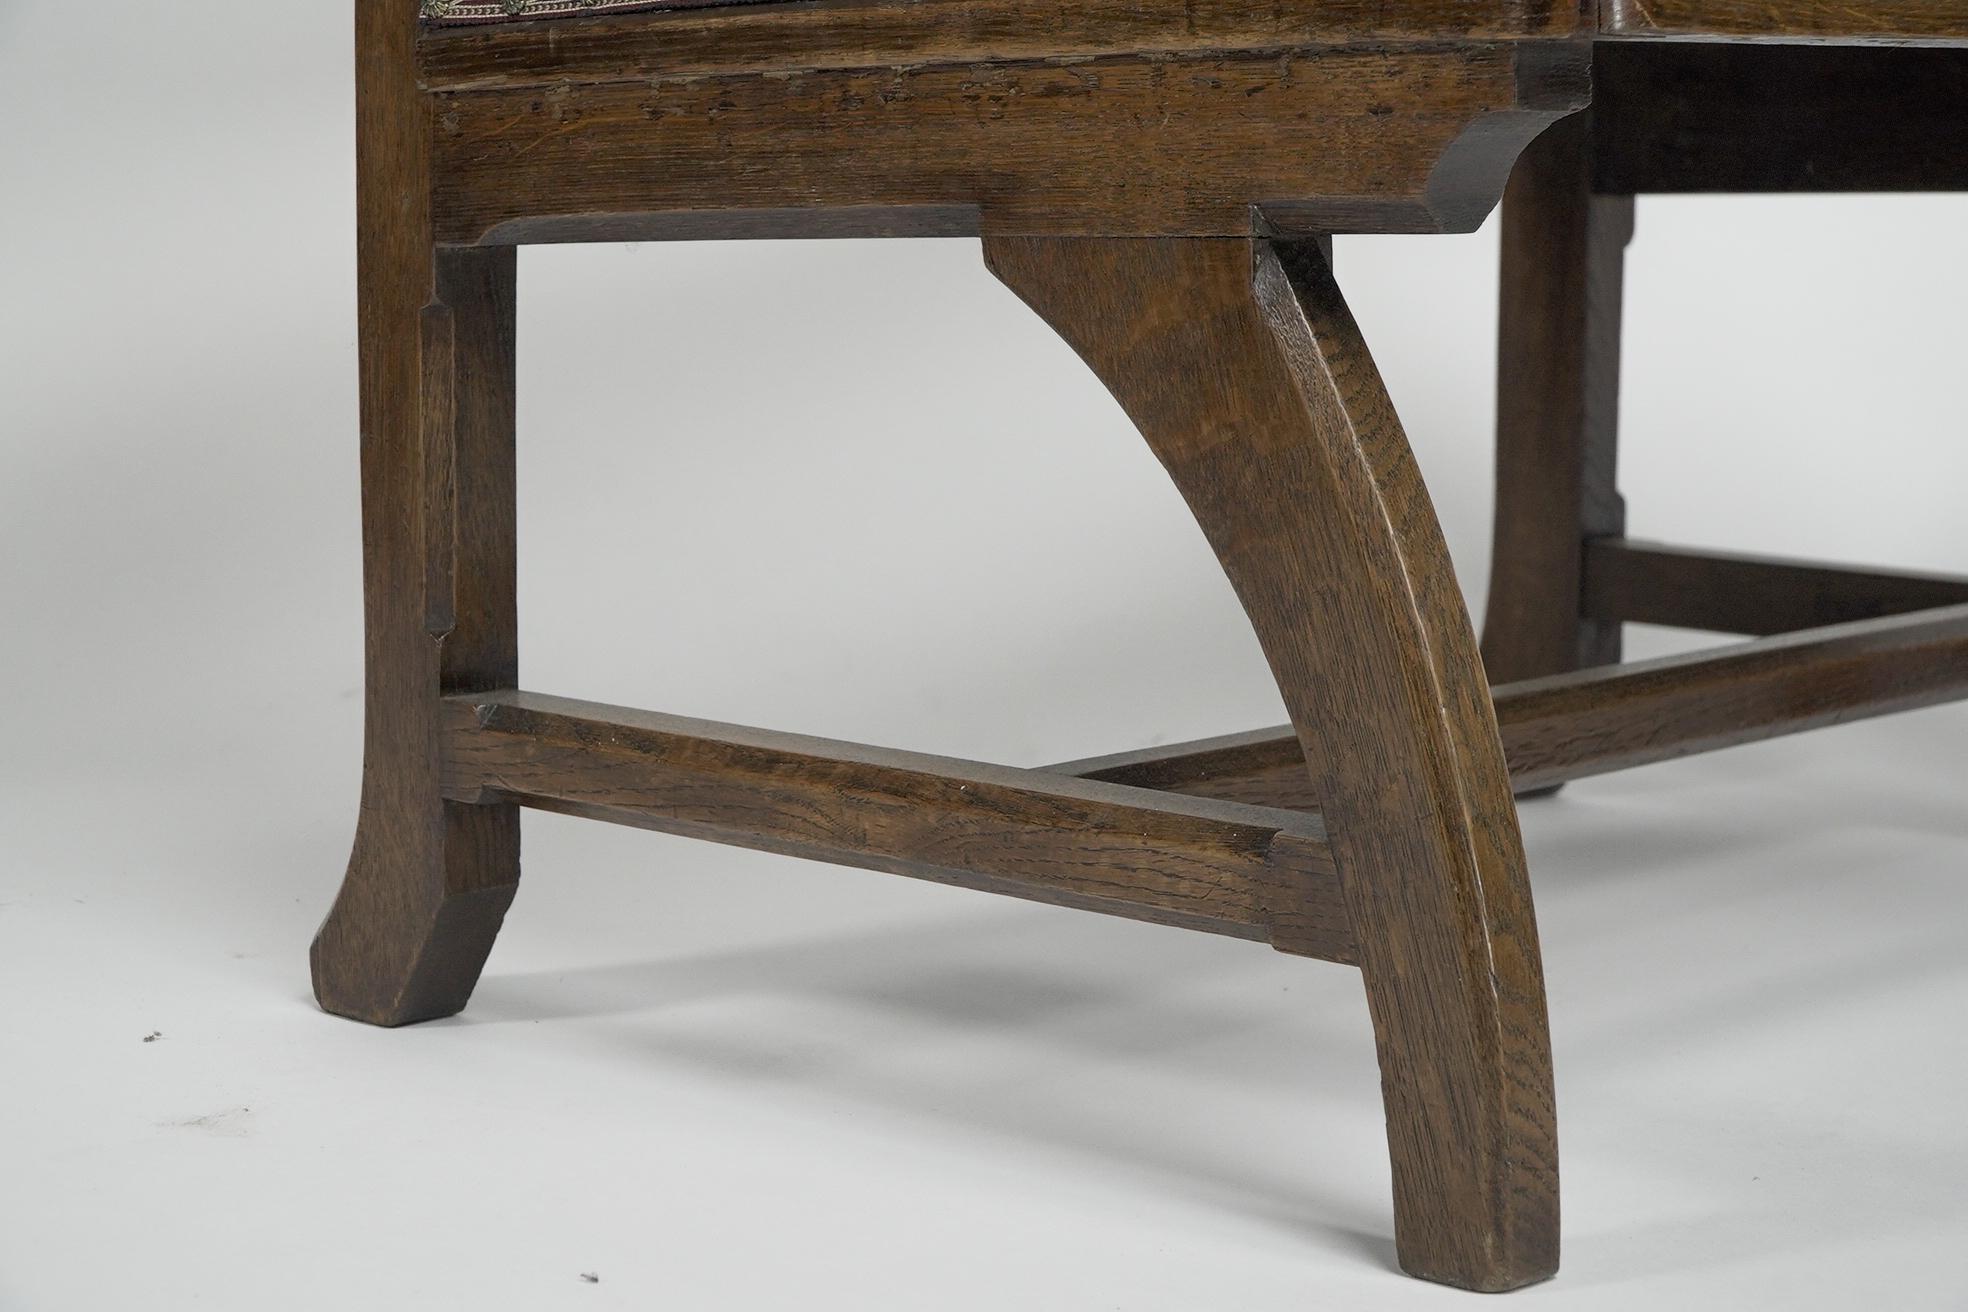 E W Pugin attri. A Gothic Revival oak duet chair with a wider than usual seat. For Sale 11